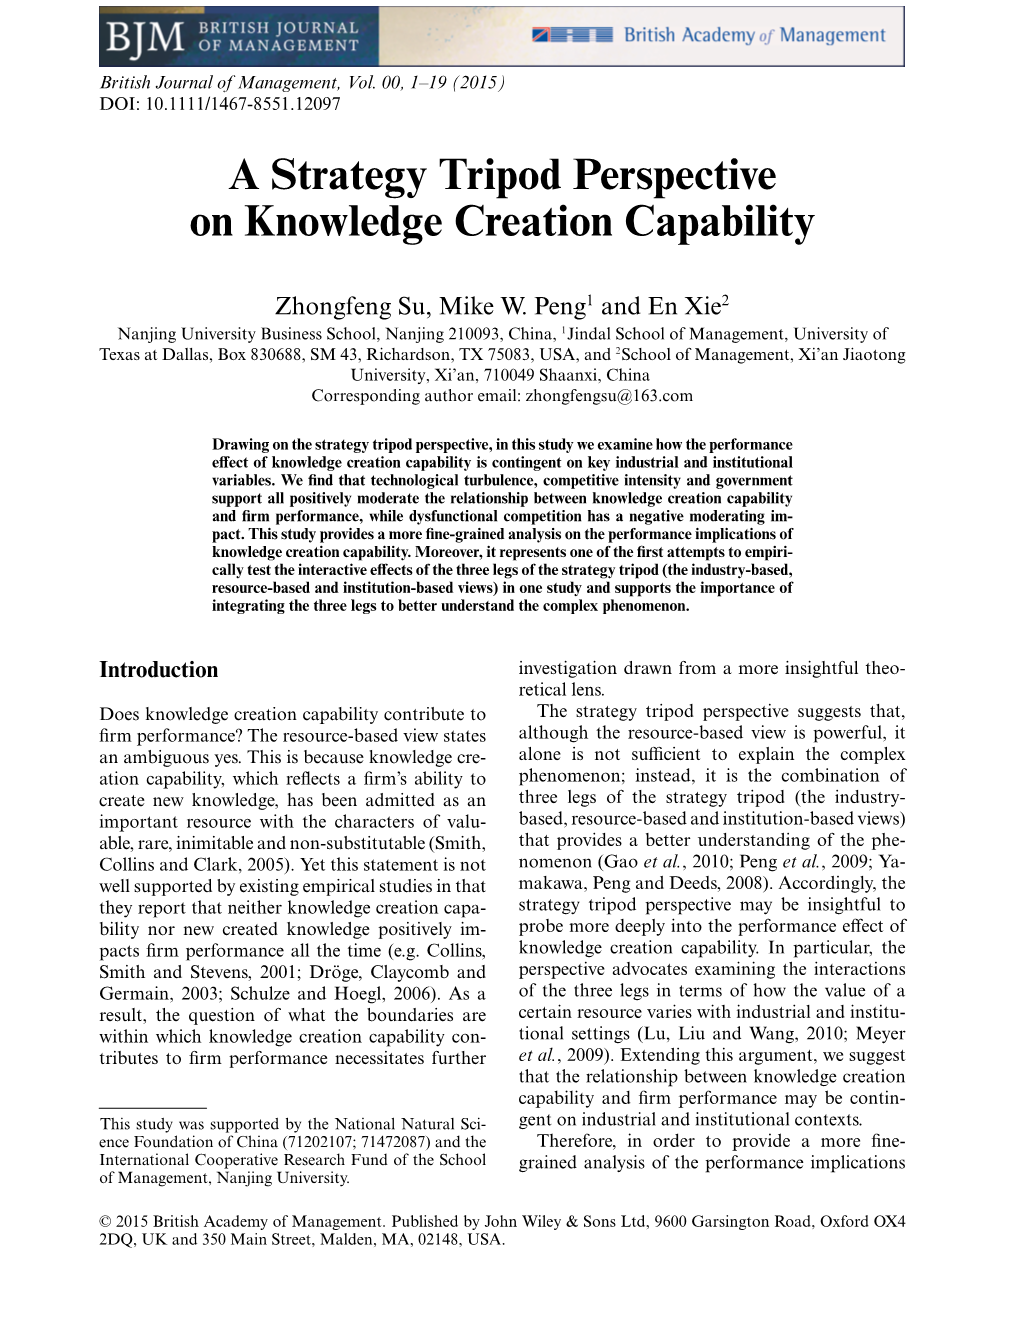 A Strategy Tripod Perspective on Knowledge Creation Capability